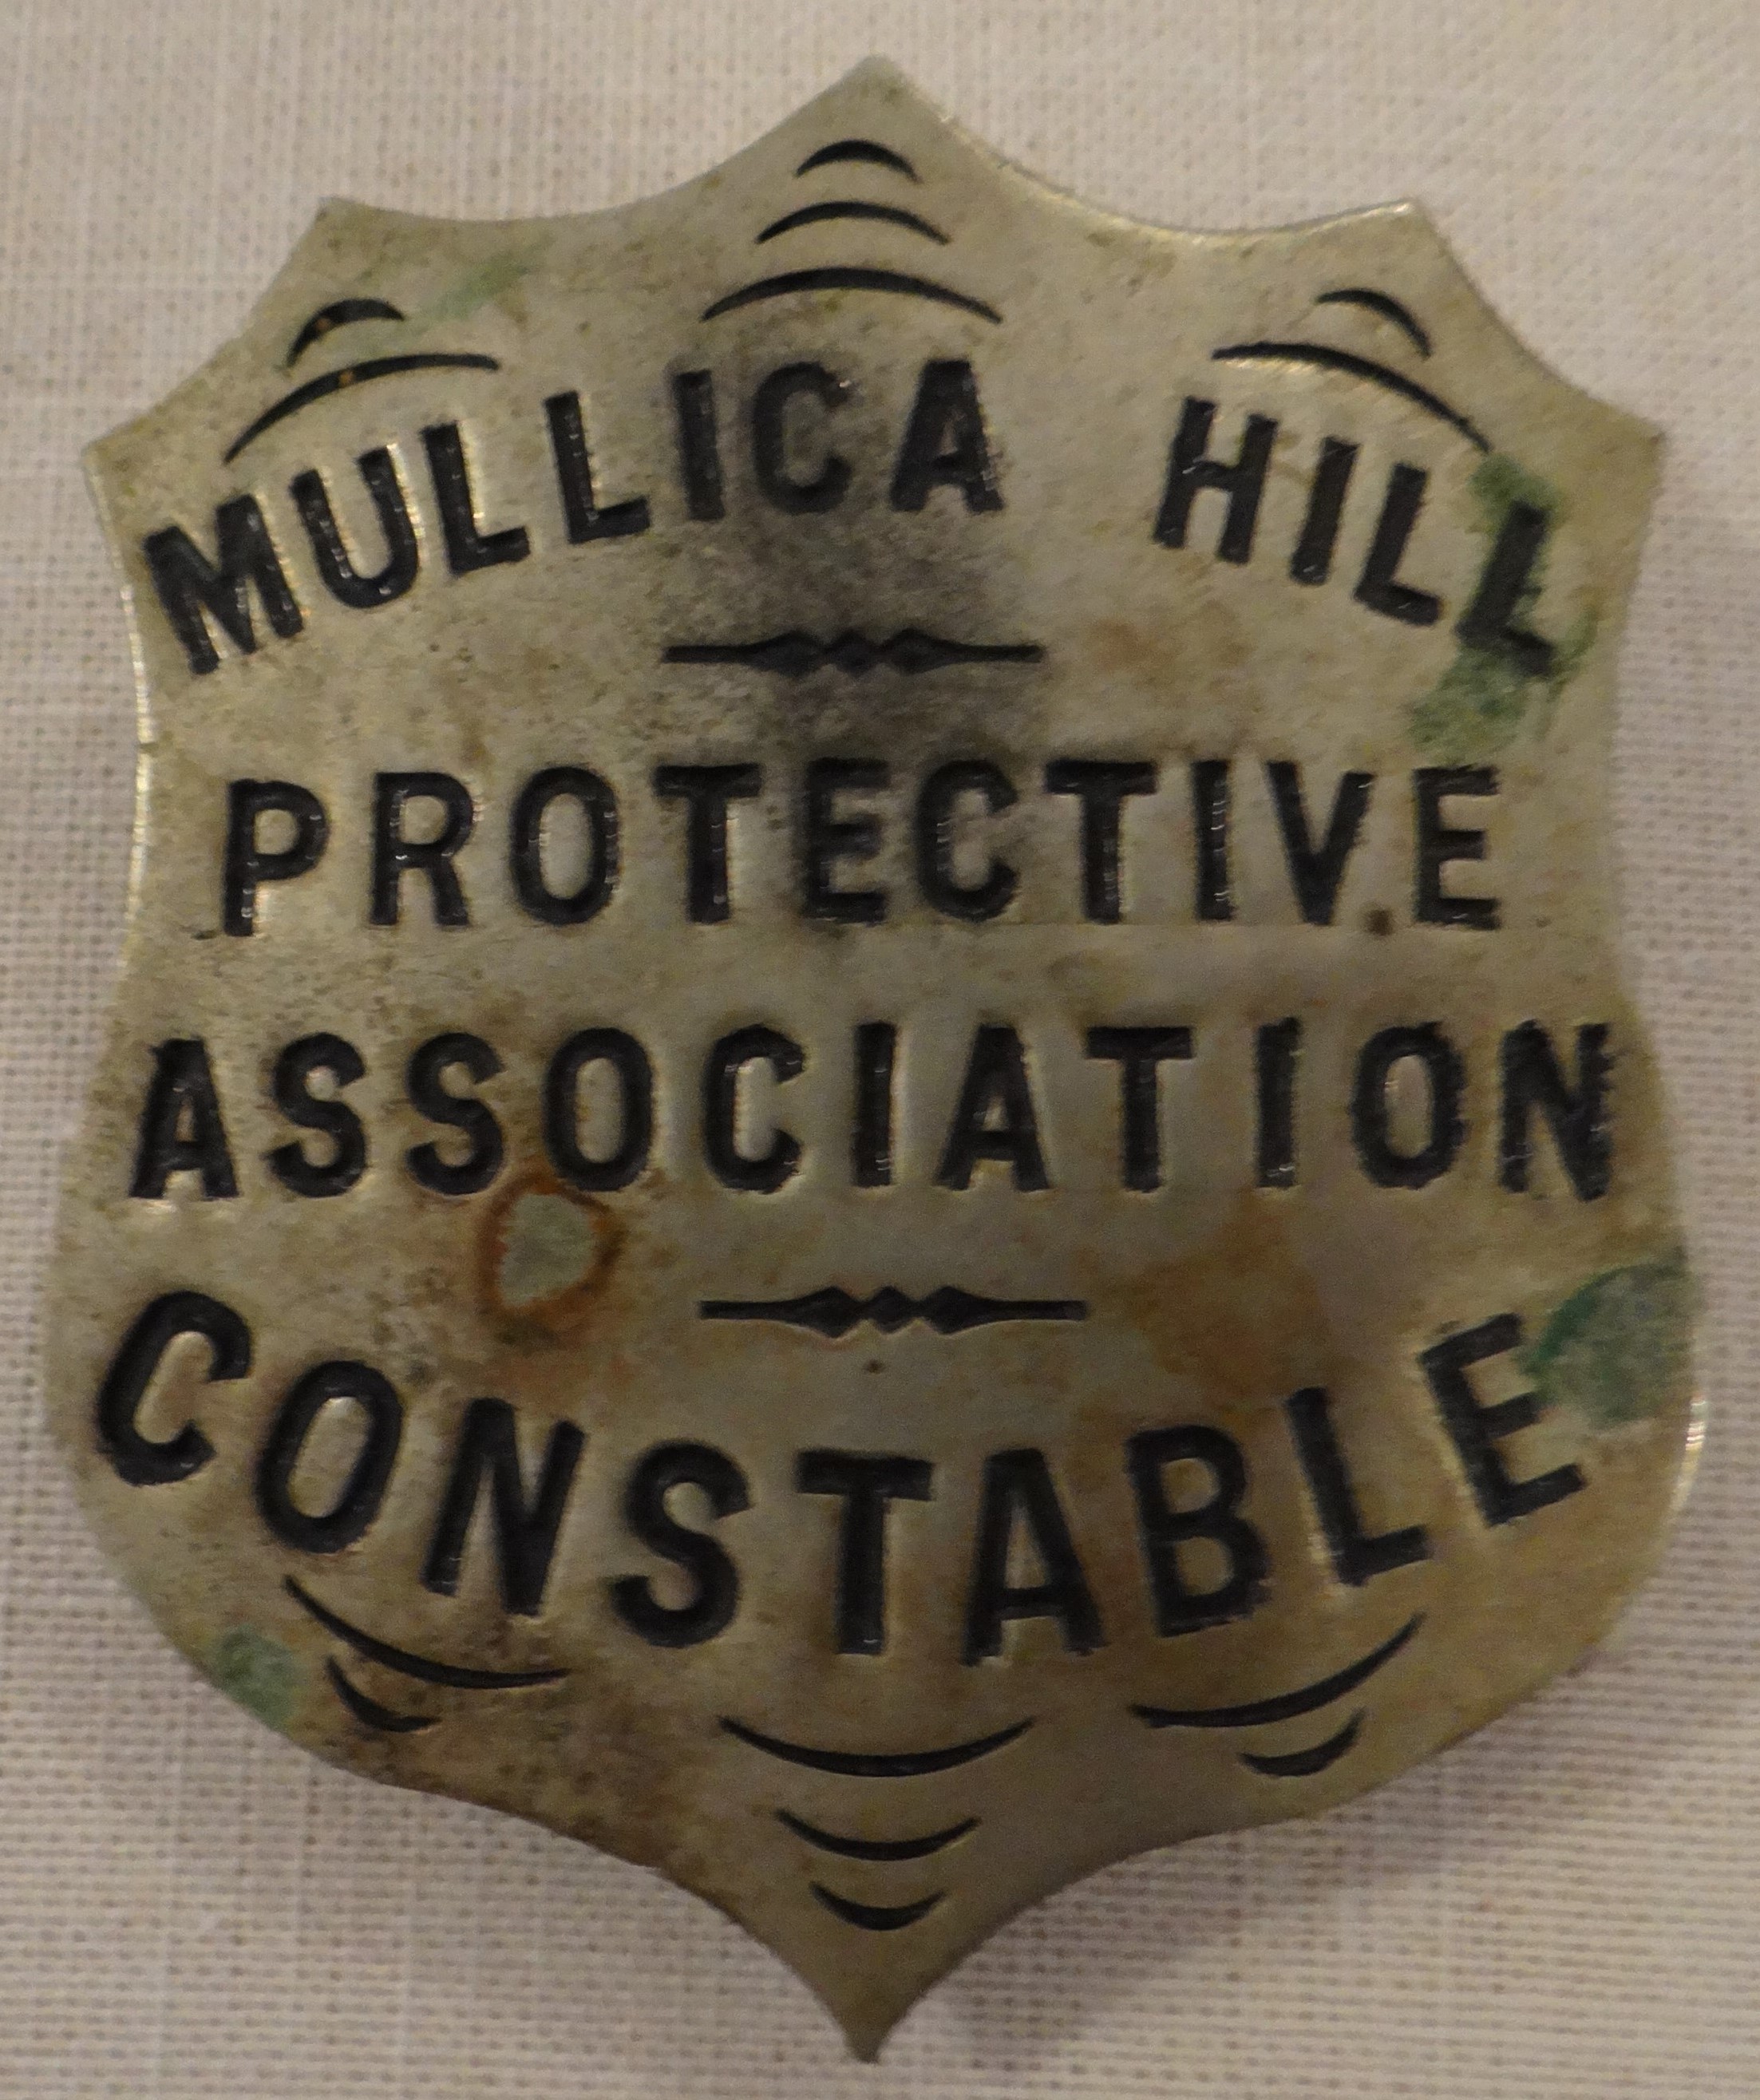   Constable Badge, Mullica Hill Protective Association for the Recovery of Stolen Horses. Mullica Hill, NJ, c1900. The Association, founded in 1896, registered horses, carriages and equipment and was formed to apprehend thieves and recover stolen pro